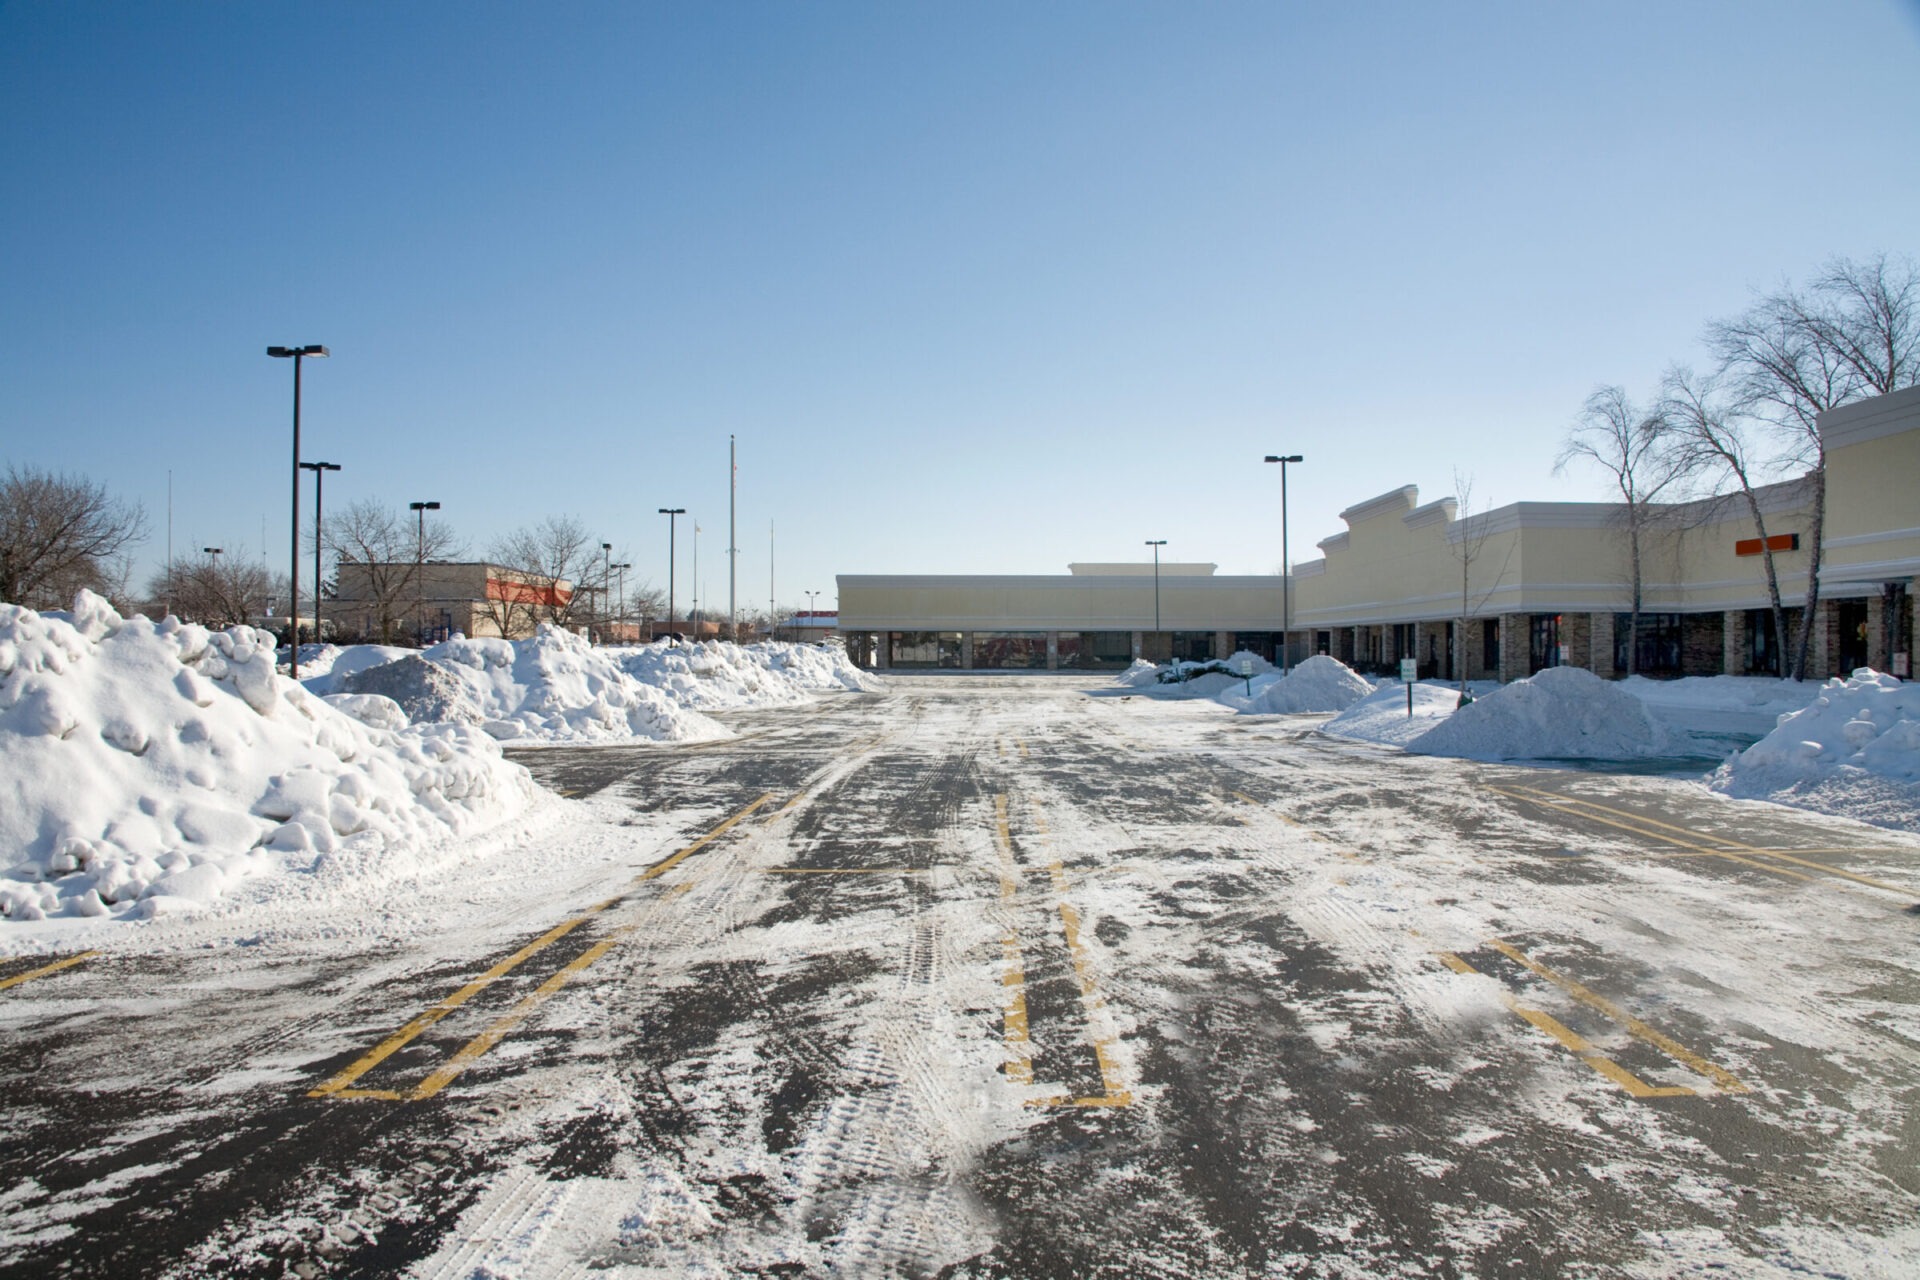 A snowy parking lot with large piles of snow, clear skies, and empty retail storefronts. Tire tracks mark the otherwise white landscape.